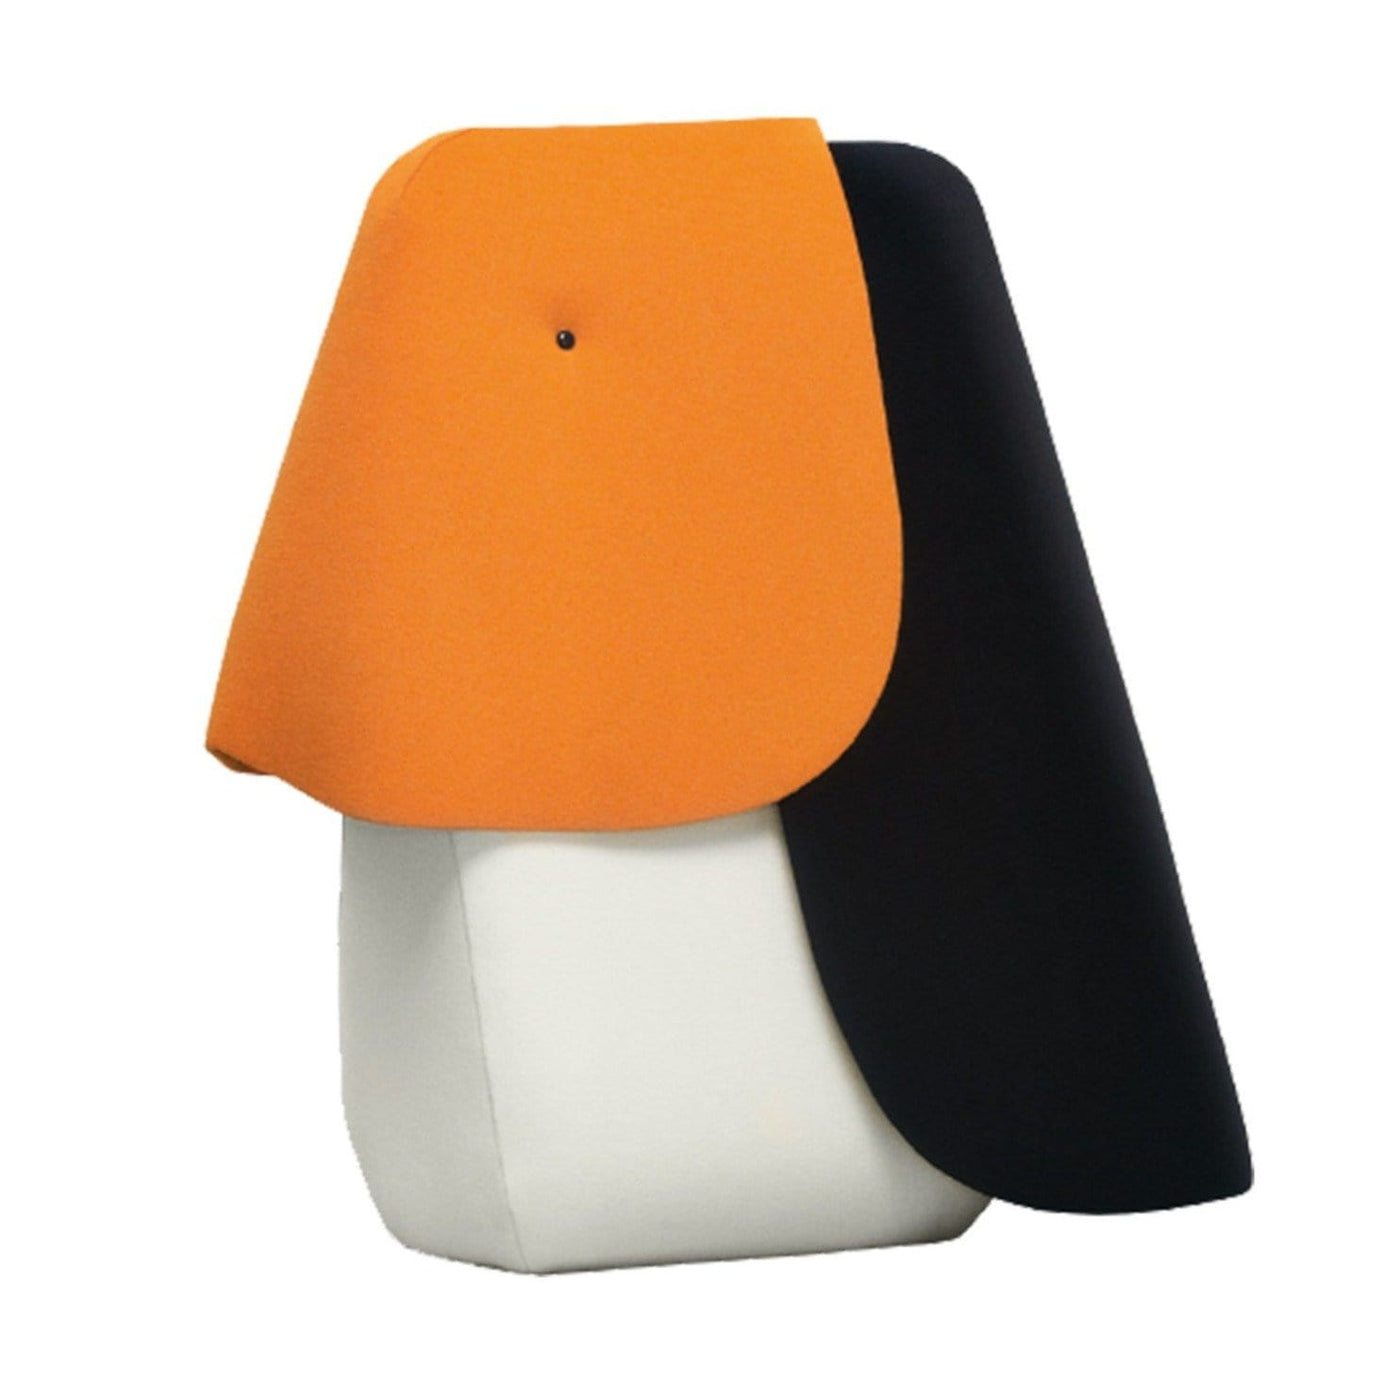 toucan large from the iconic zoo collection by designer Ionna Vautrin.  Colourful and playful cuddletoys available in an oversized version and mini teddy bear option.  Geometric shapes create a bold statement in a playroom or living room setting.